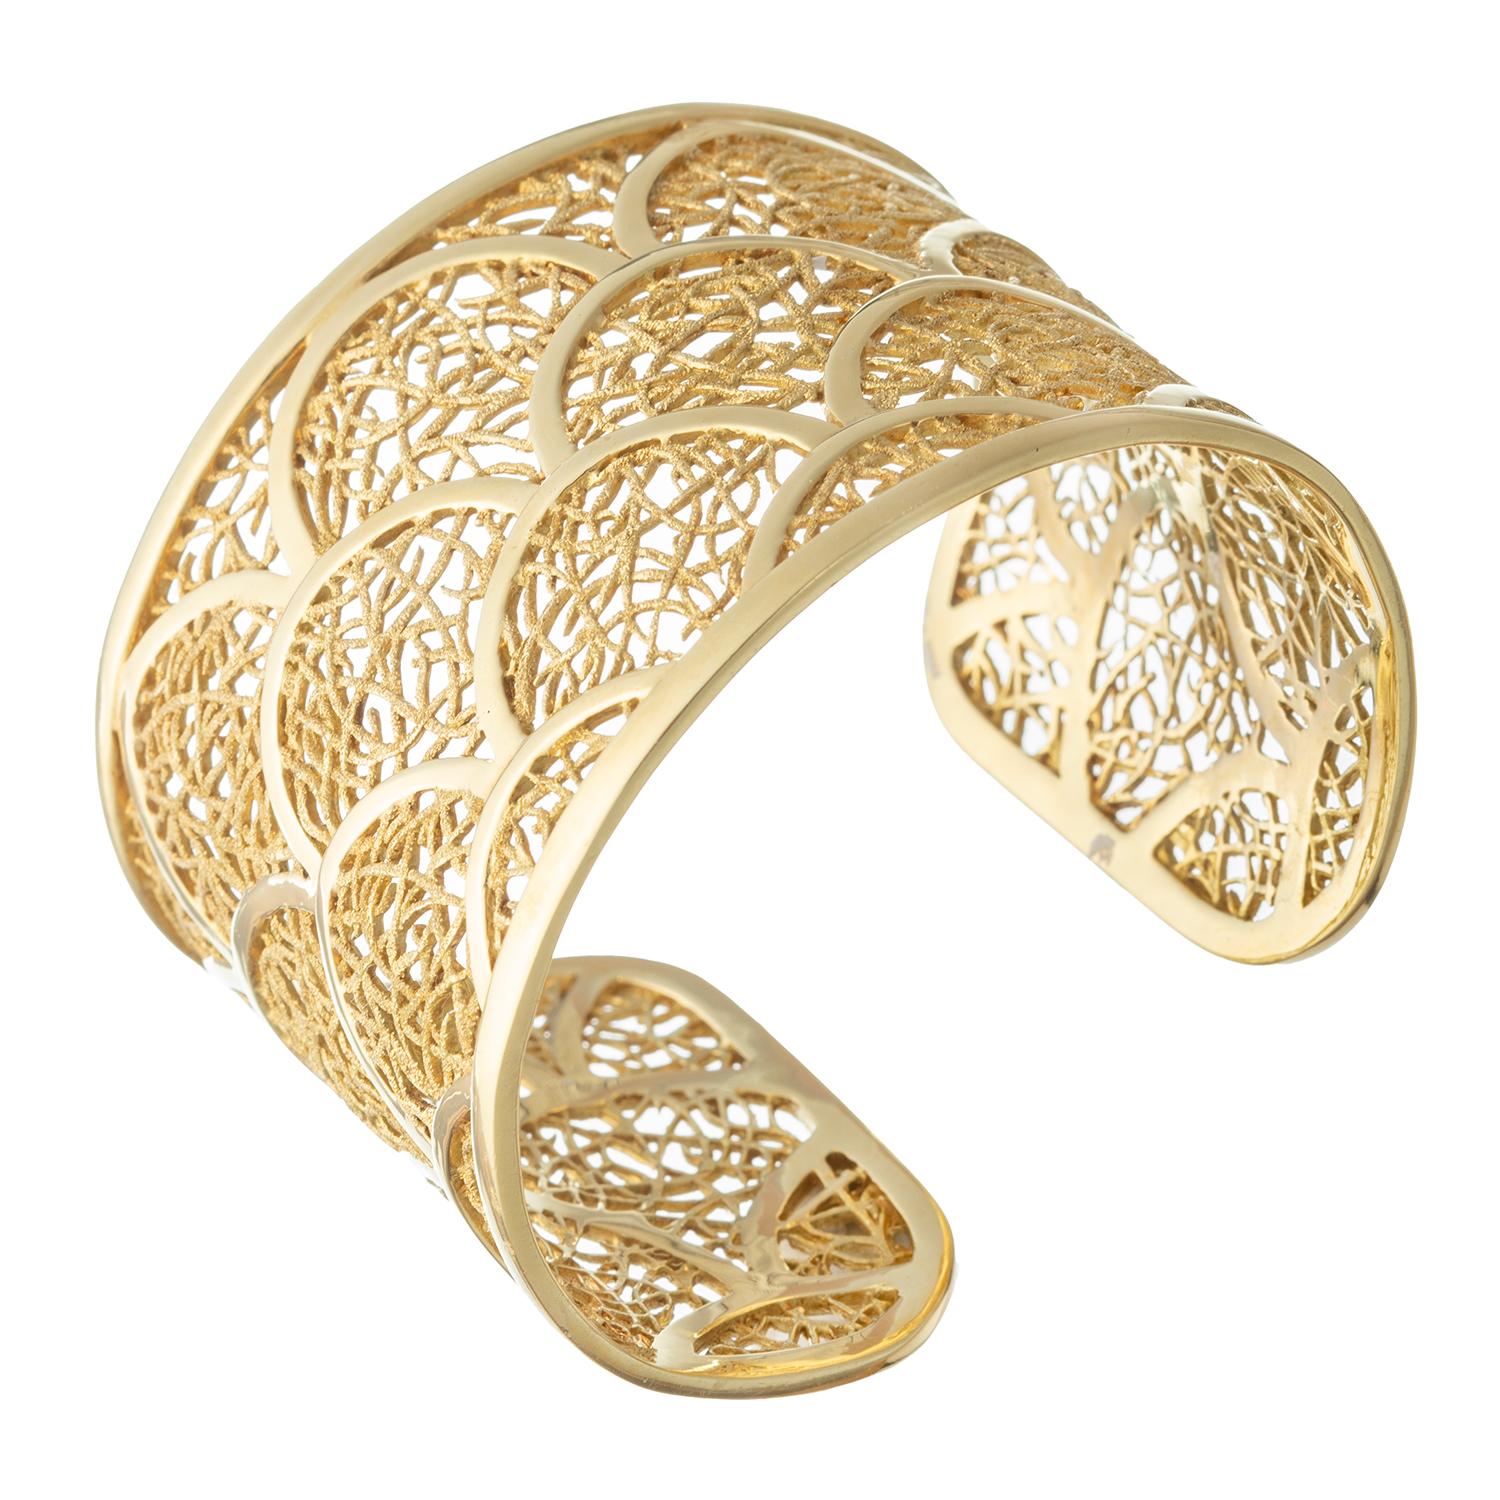 Indulge in the timeless beauty of the Nicholas Varney 18 karat gold Porto Nuevo cuff bracelet. This spectacular piece showcases an exceptional design featuring organic lattice sections joined by polished gold arches, creating a harmonious and